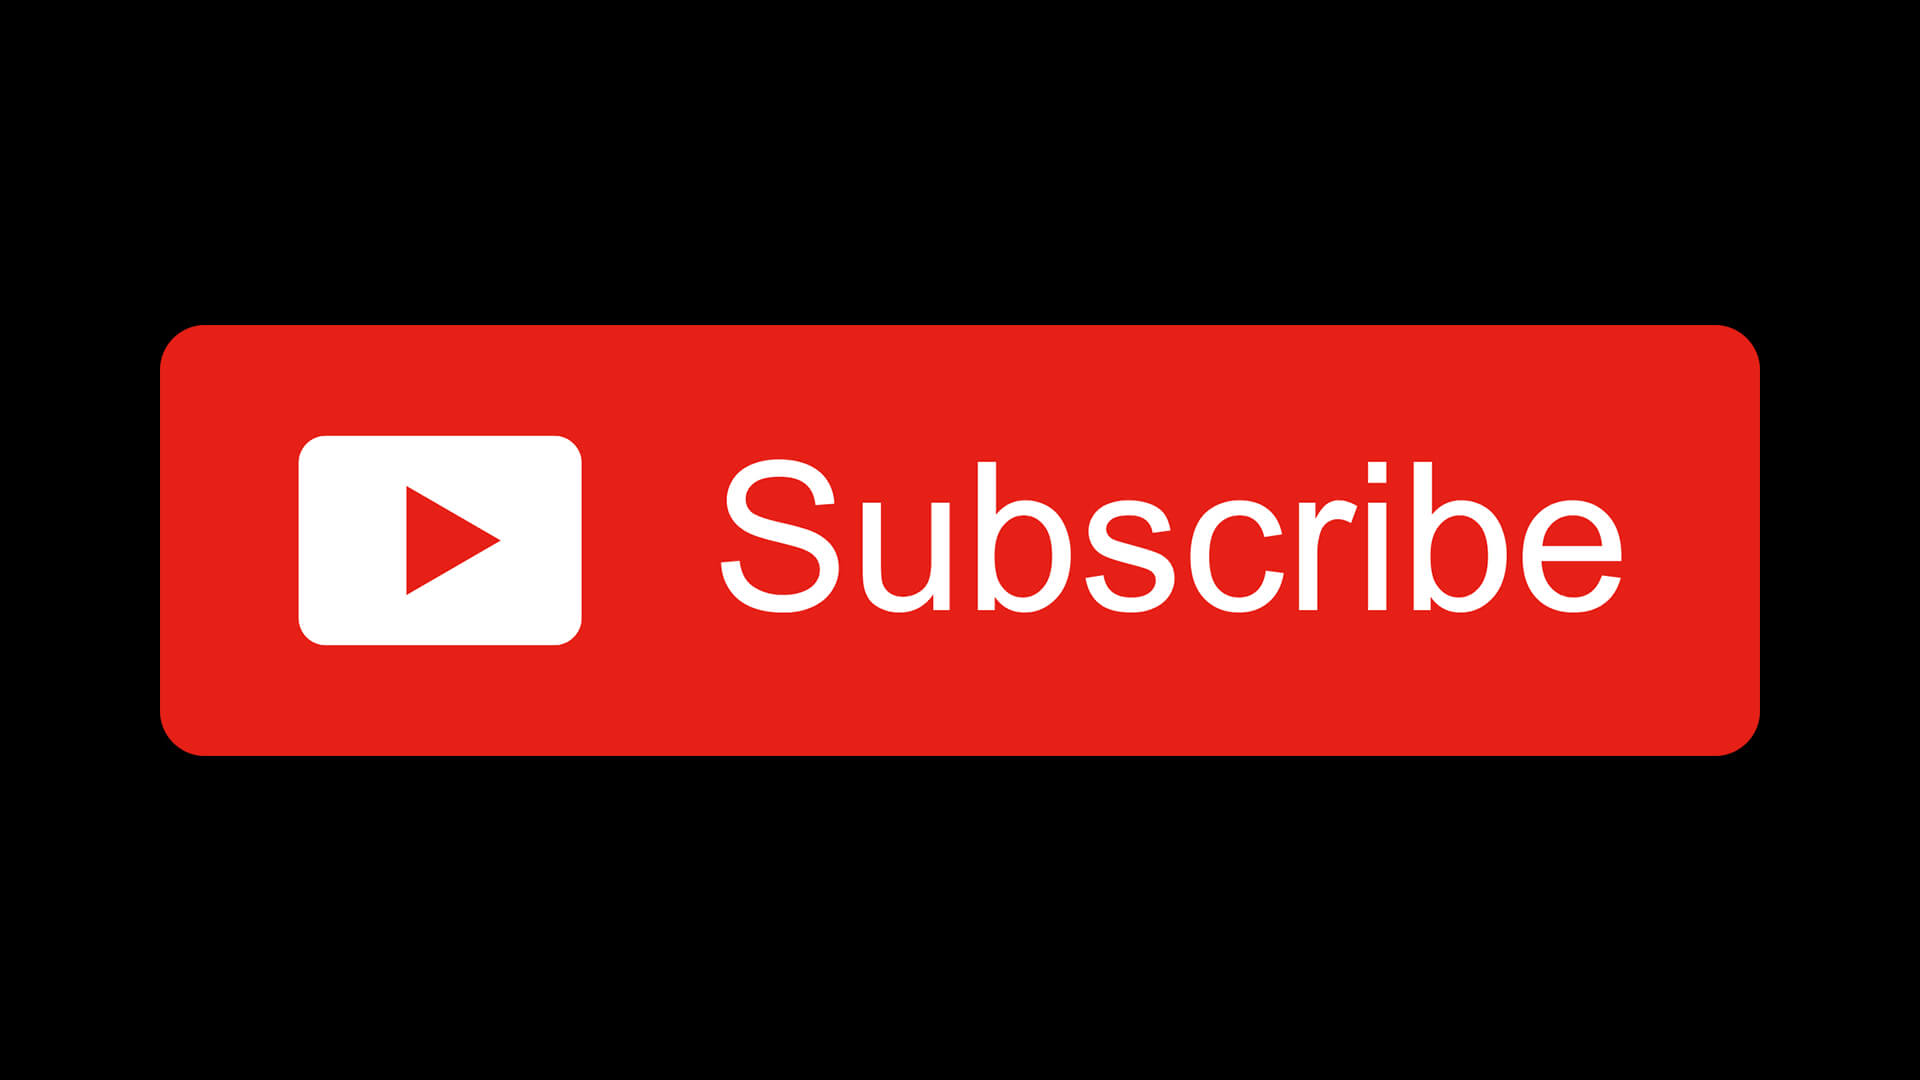 Free YouTube Subscribe Button Download Design Inspiration By AlfredoCreates 8